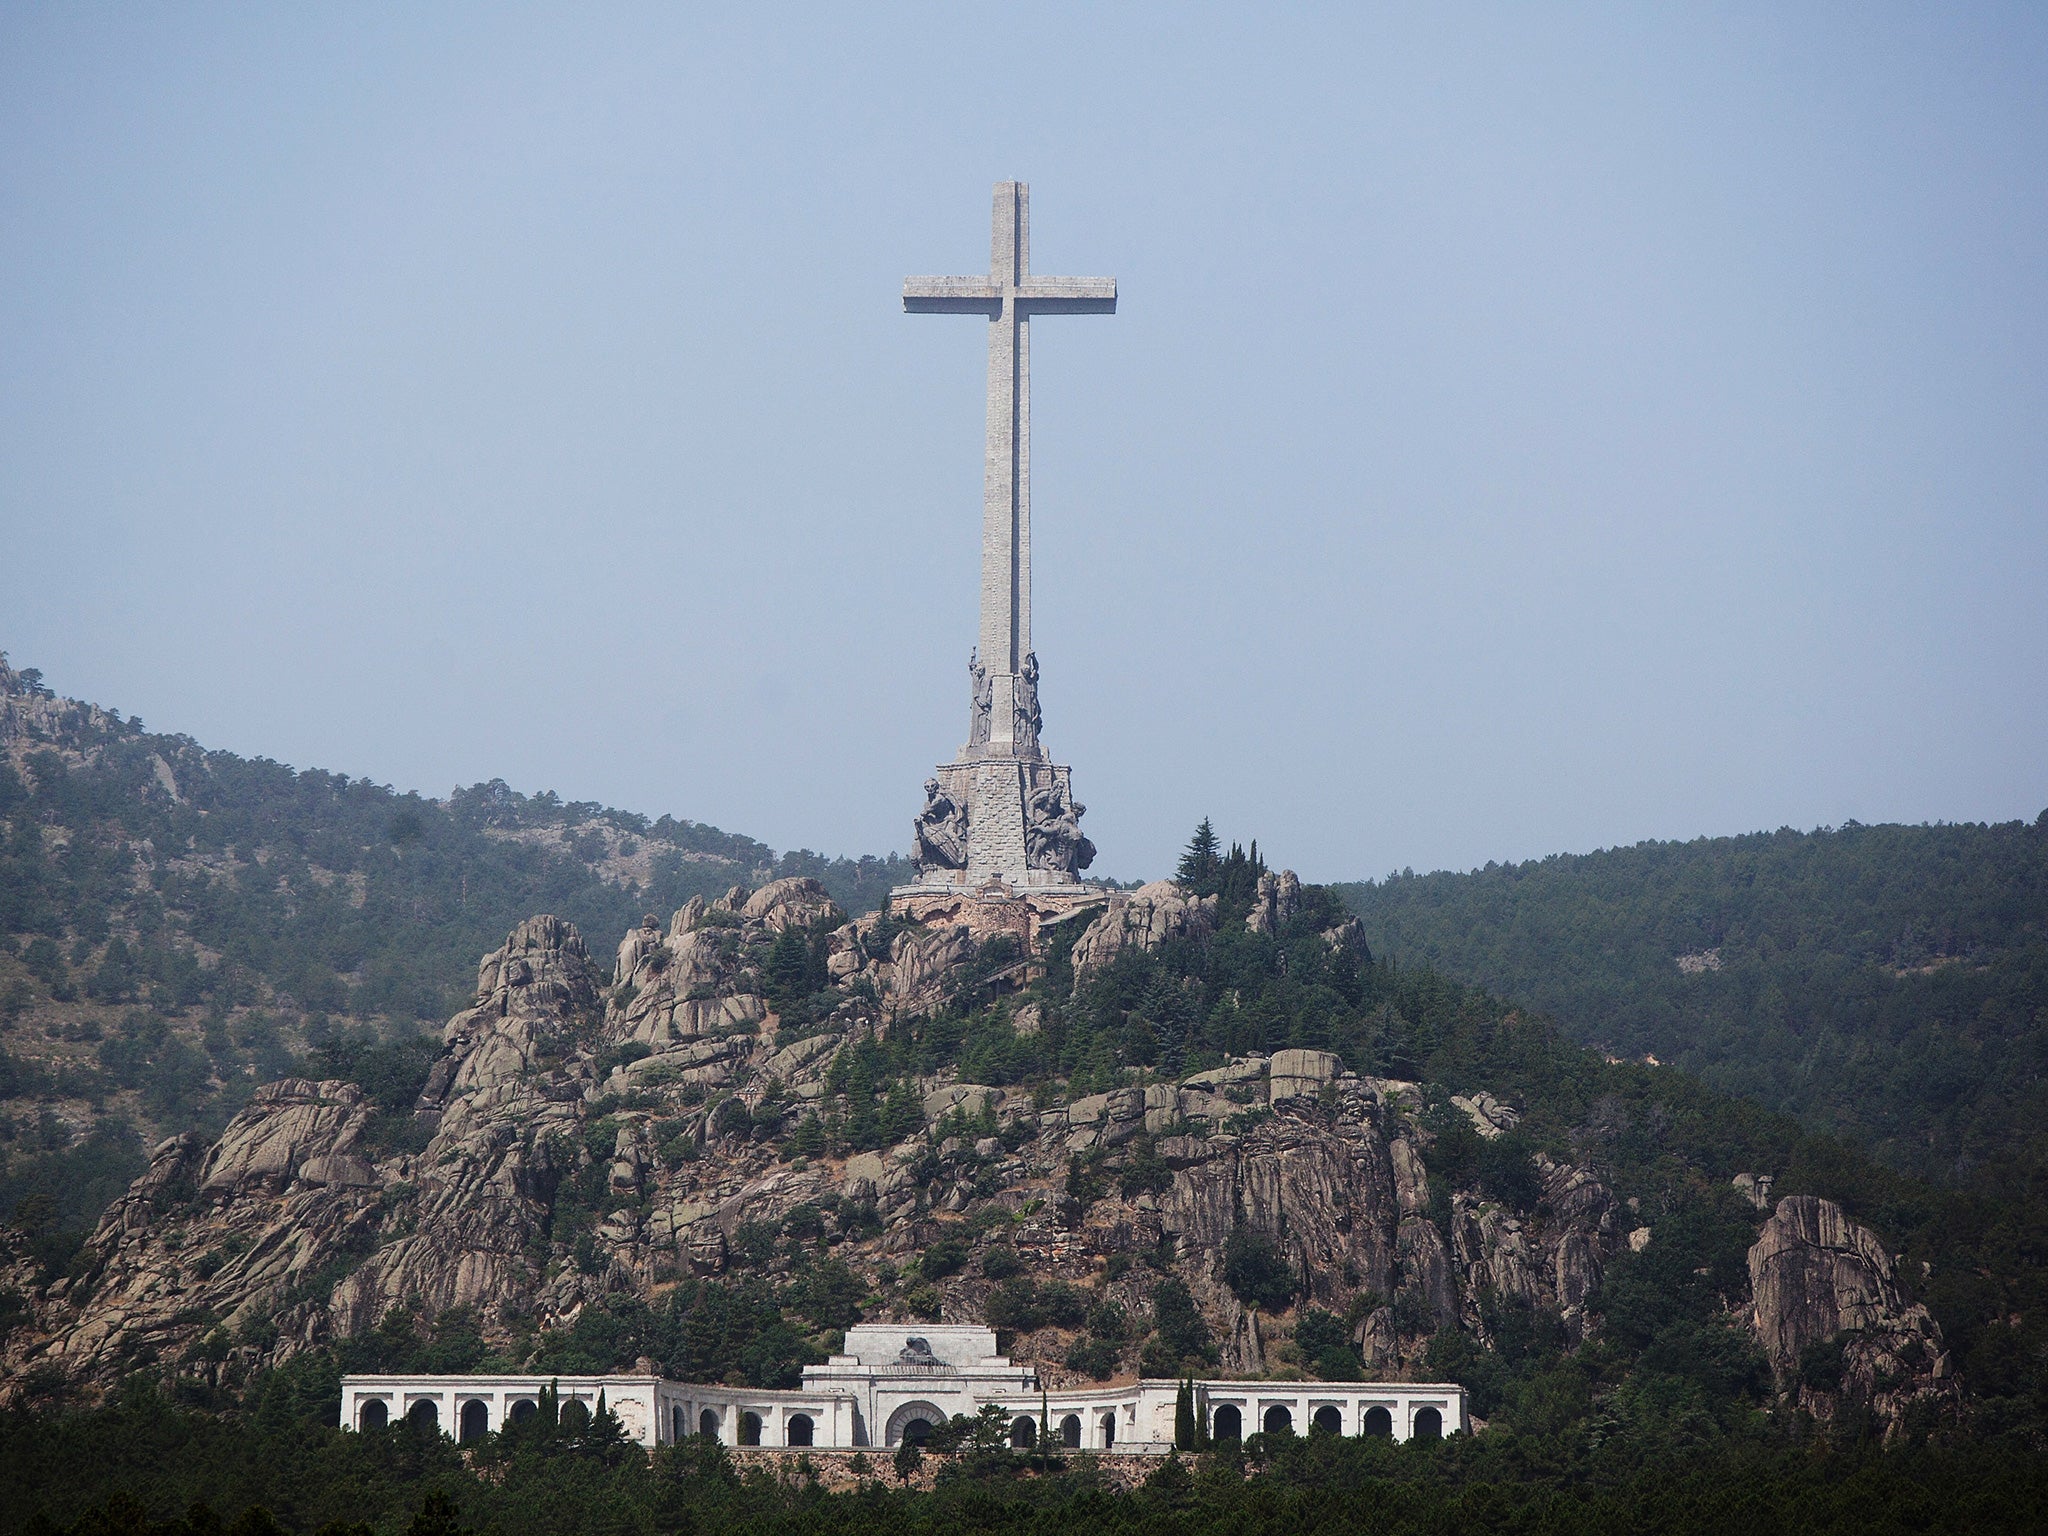 The Valle de los Caídos, near Madrid: Franco’s tomb is situated near the Valley of the Fallen, where lie the remains of 40,000 victims